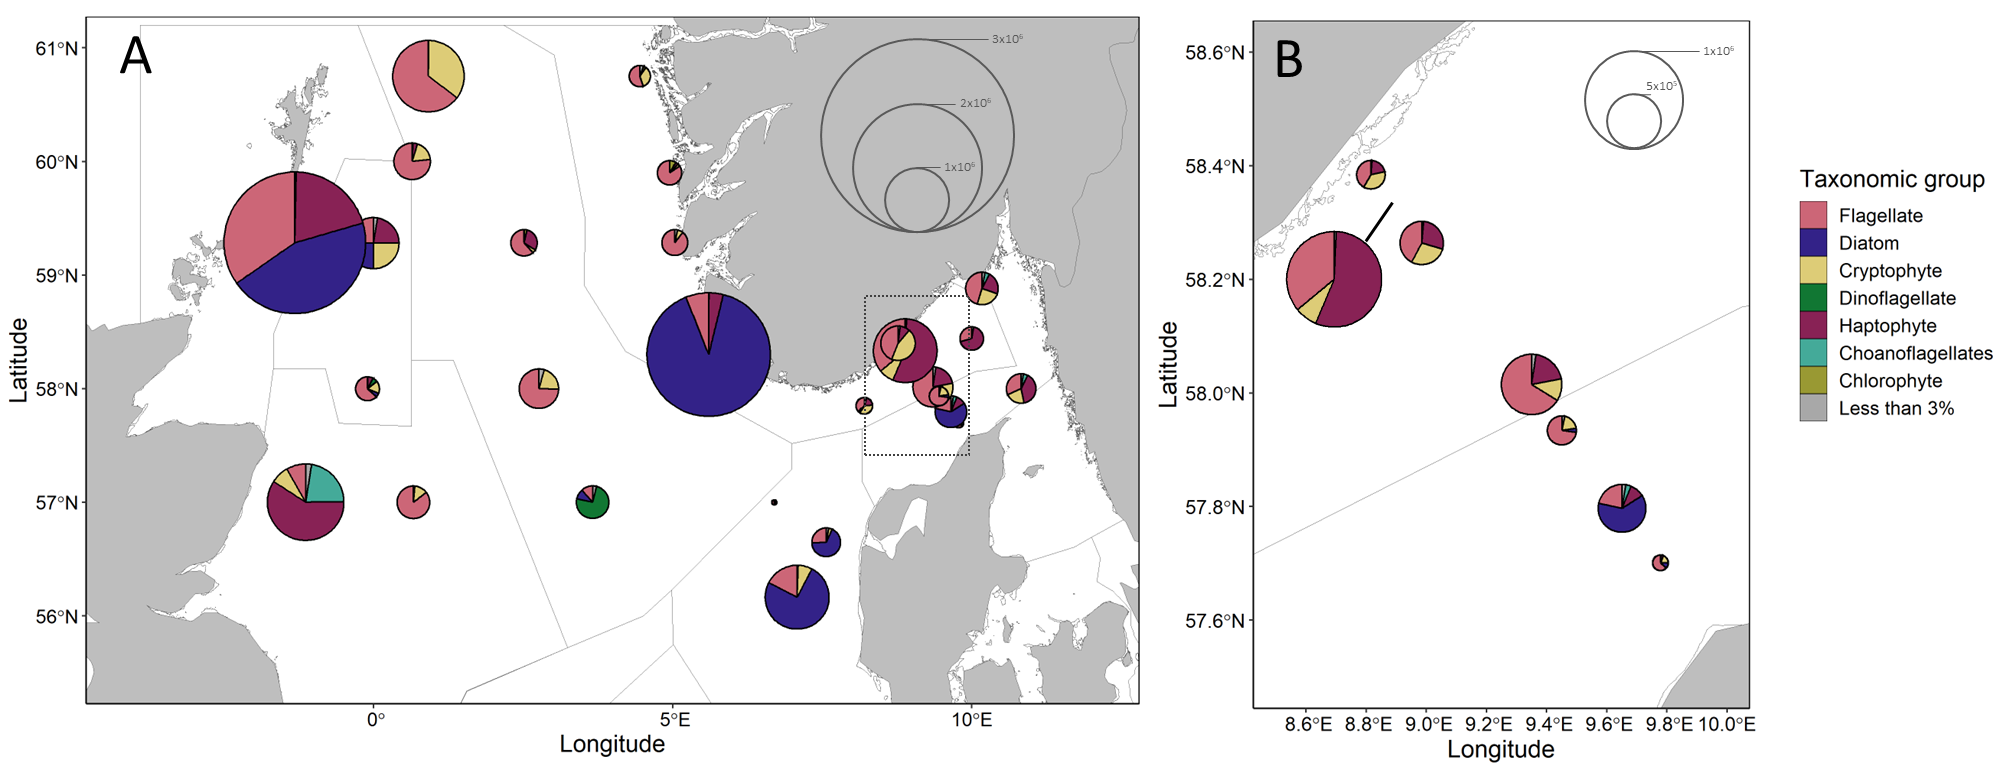 Figure 12. Microplankton community composition and abundance. A) All sampled stations, B) Inset from map A showing Torungen-Hirtshals. Divisions within pie charts show the contributions from broad taxonomic groups in cells per liter. Pie chart radii scale to average cell concentrations. Groups accounting for less than 3% of a community at a given station are summed.